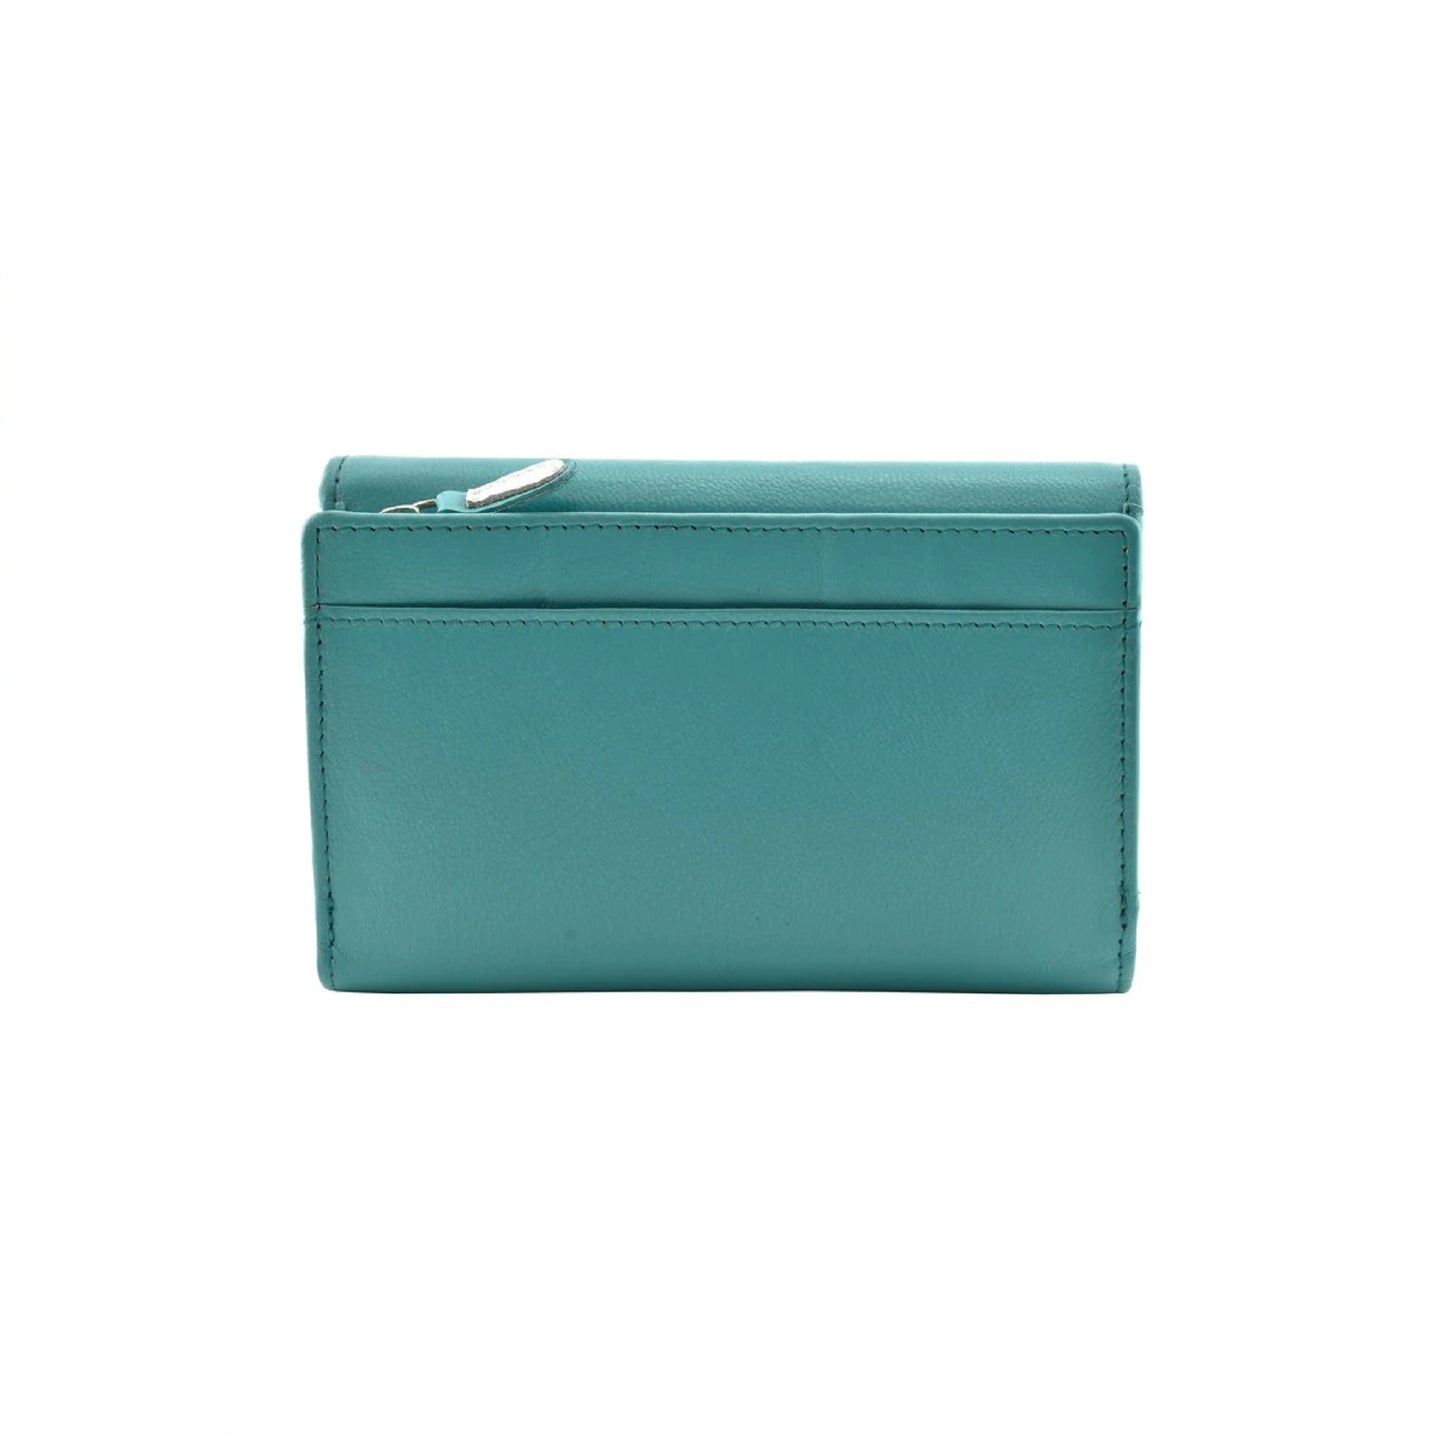 Shiloh Matinee Leather Wallet - Green